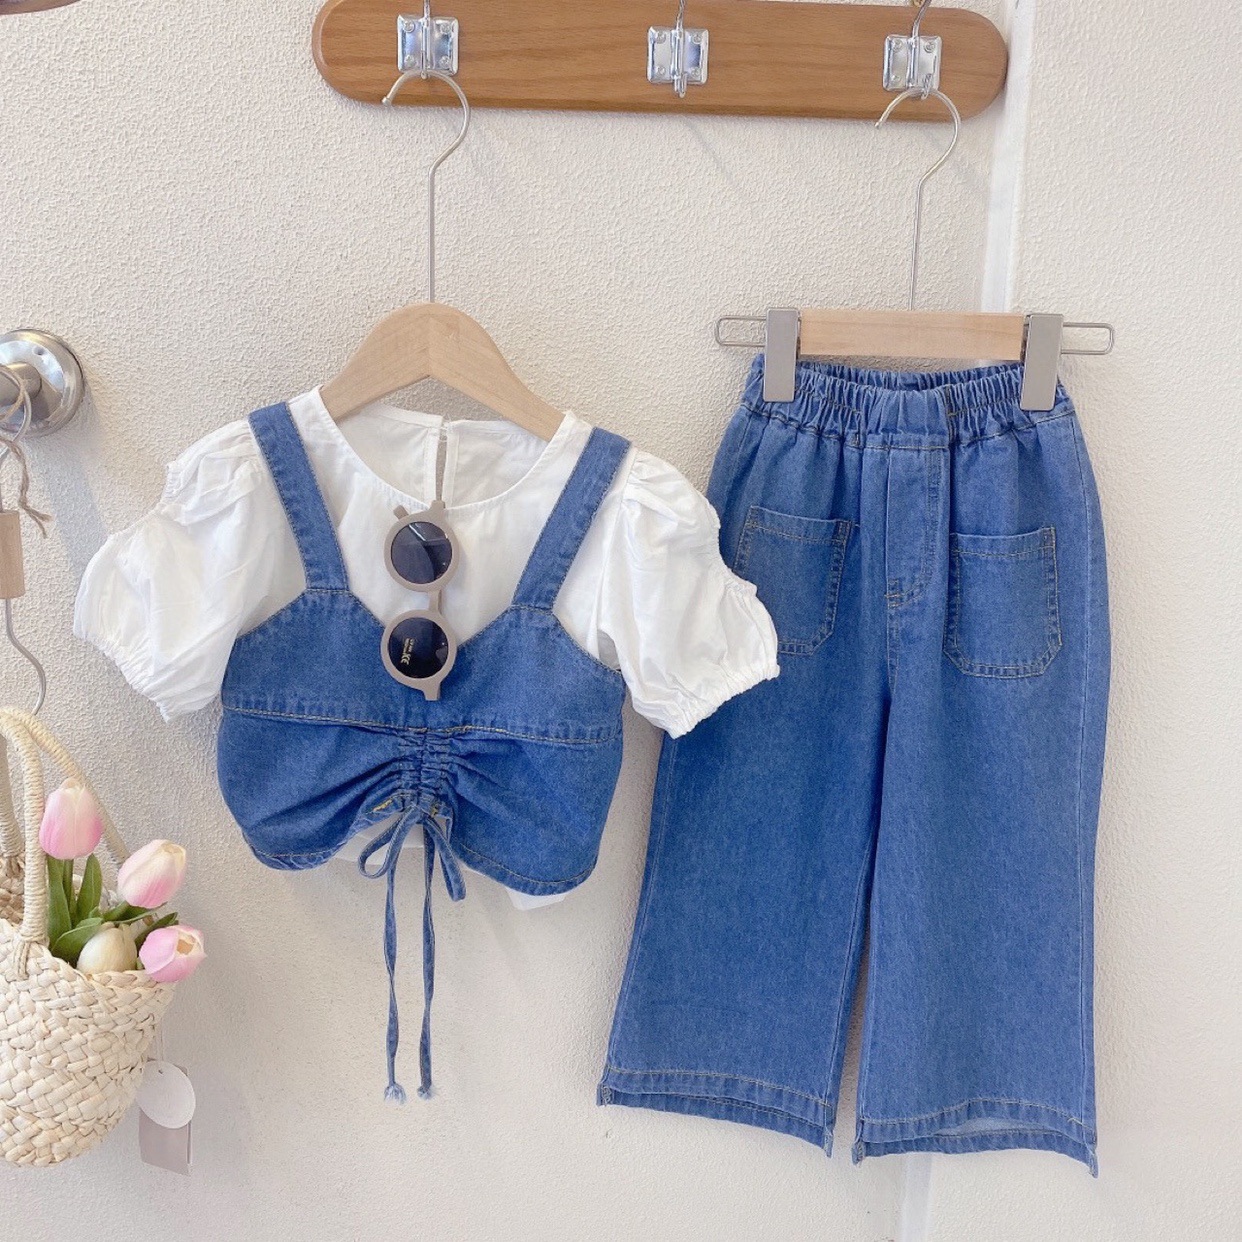 Summer Three Piece Soft Jeans Wide Leg Pants, T-Shirt And Jeans Suspenders Set For Girls